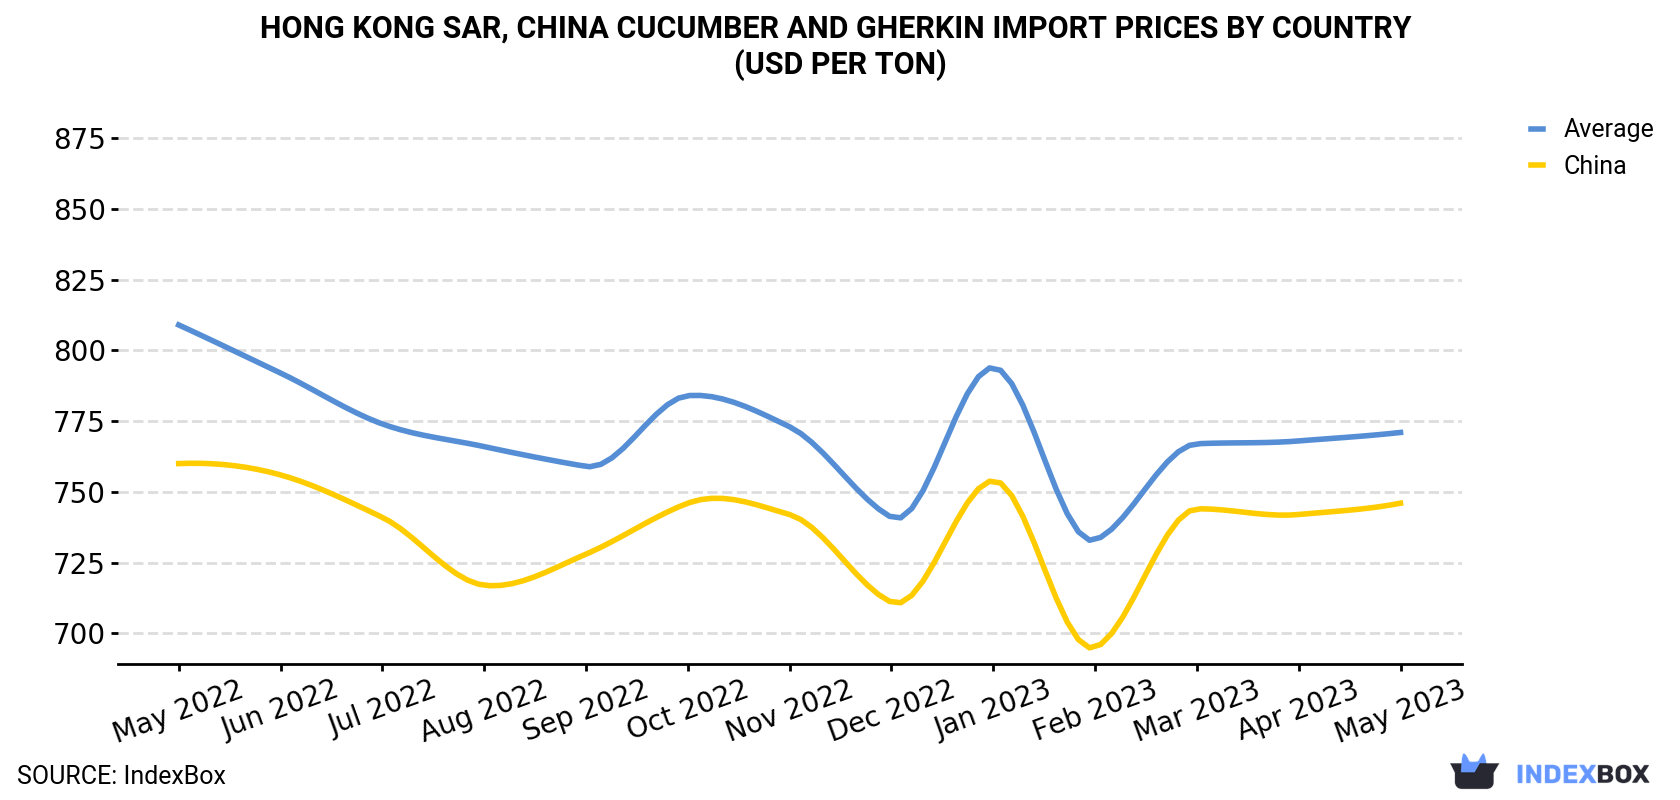 Hong Kong Cucumber And Gherkin Import Prices By Country (USD Per Ton)